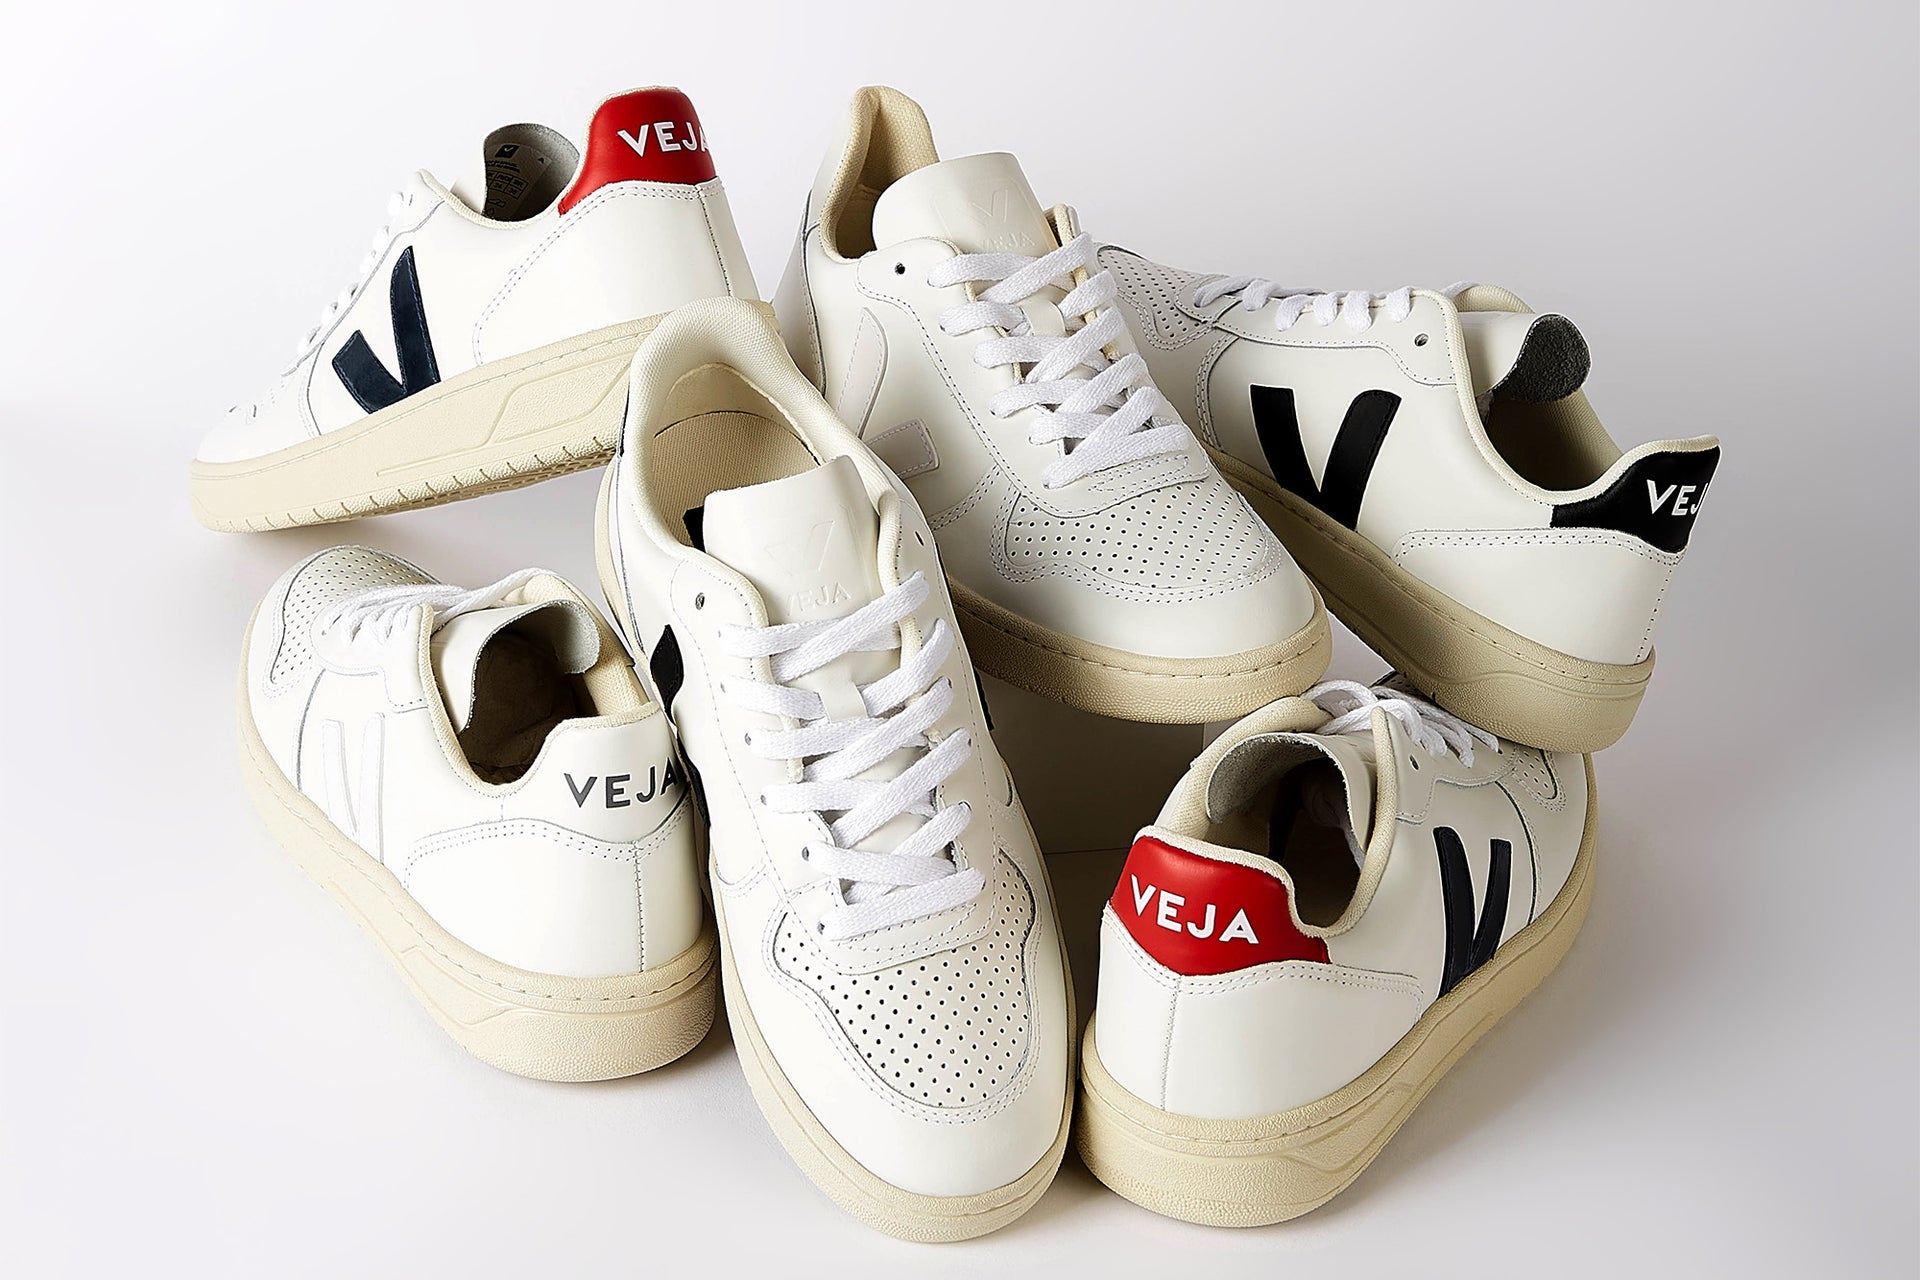 VEJA’s Environmental Commitment to the Planet